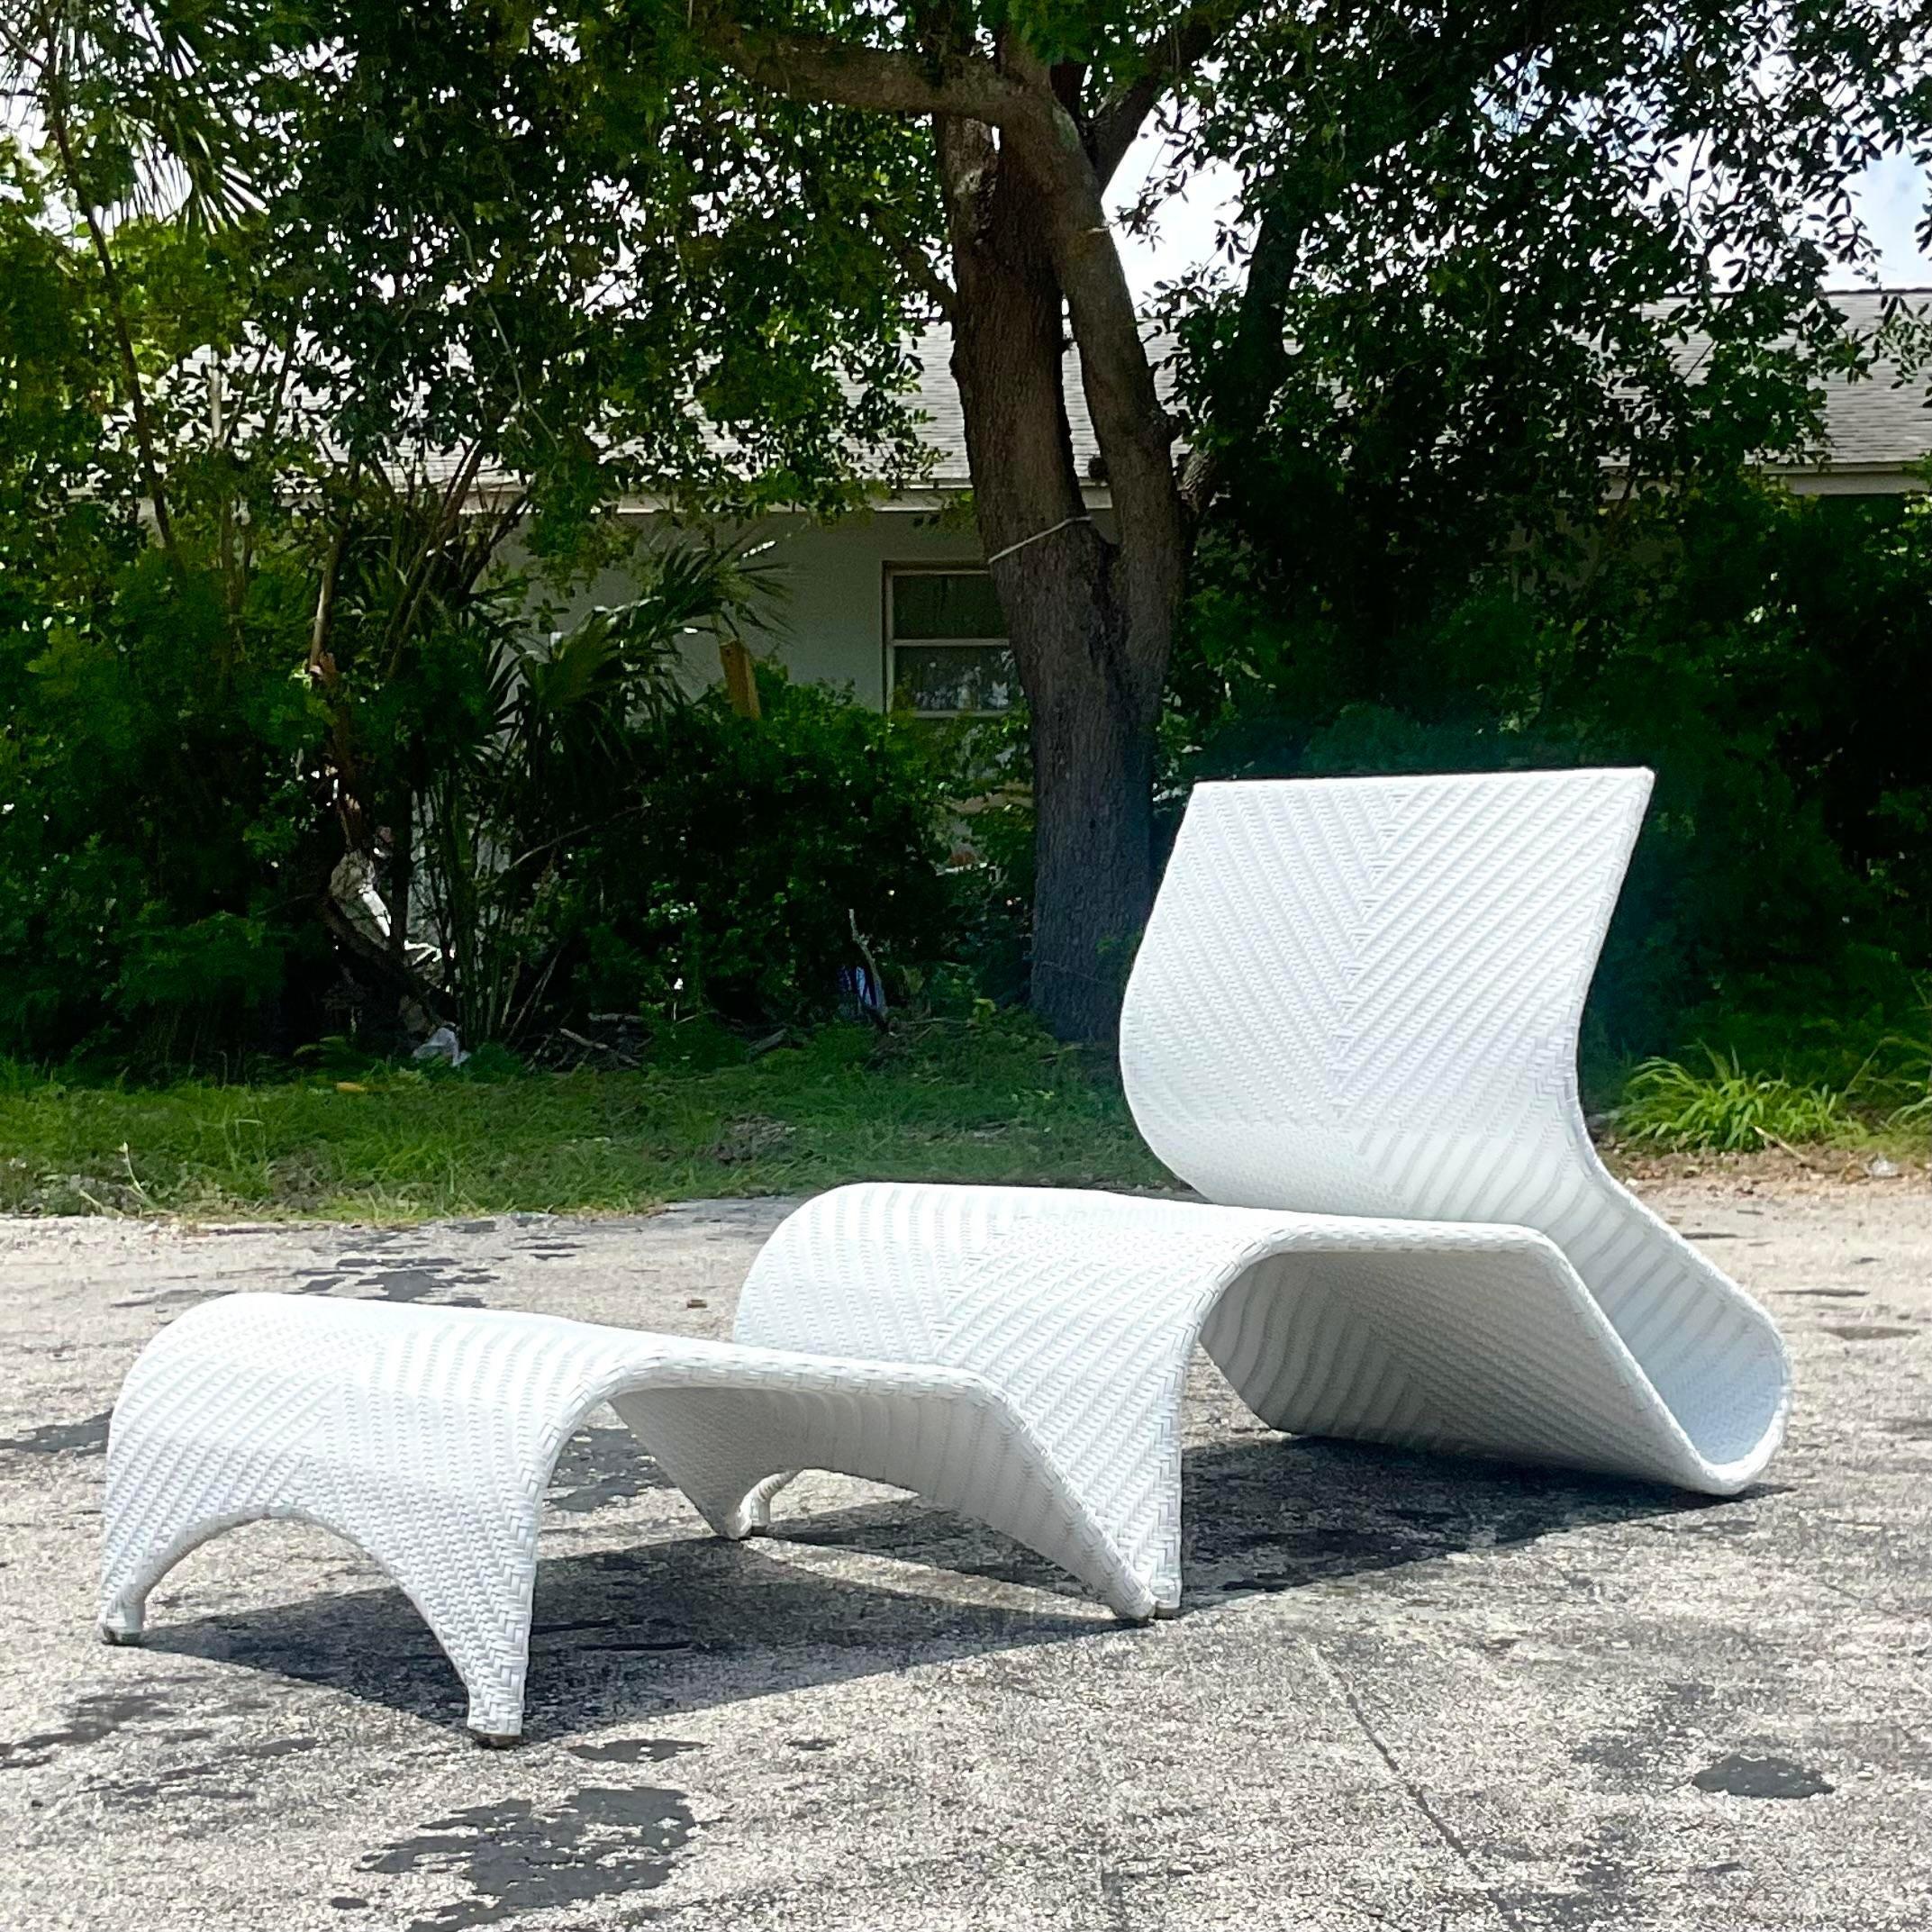 A fantastic vintage chair and ottoman set from the brand Kannoa’s Maui collection in white. It is a great addition to your patio furniture. Acquired at a Palm Beach estate.

Ottoman Dimensions: 29w x 32d x 14h